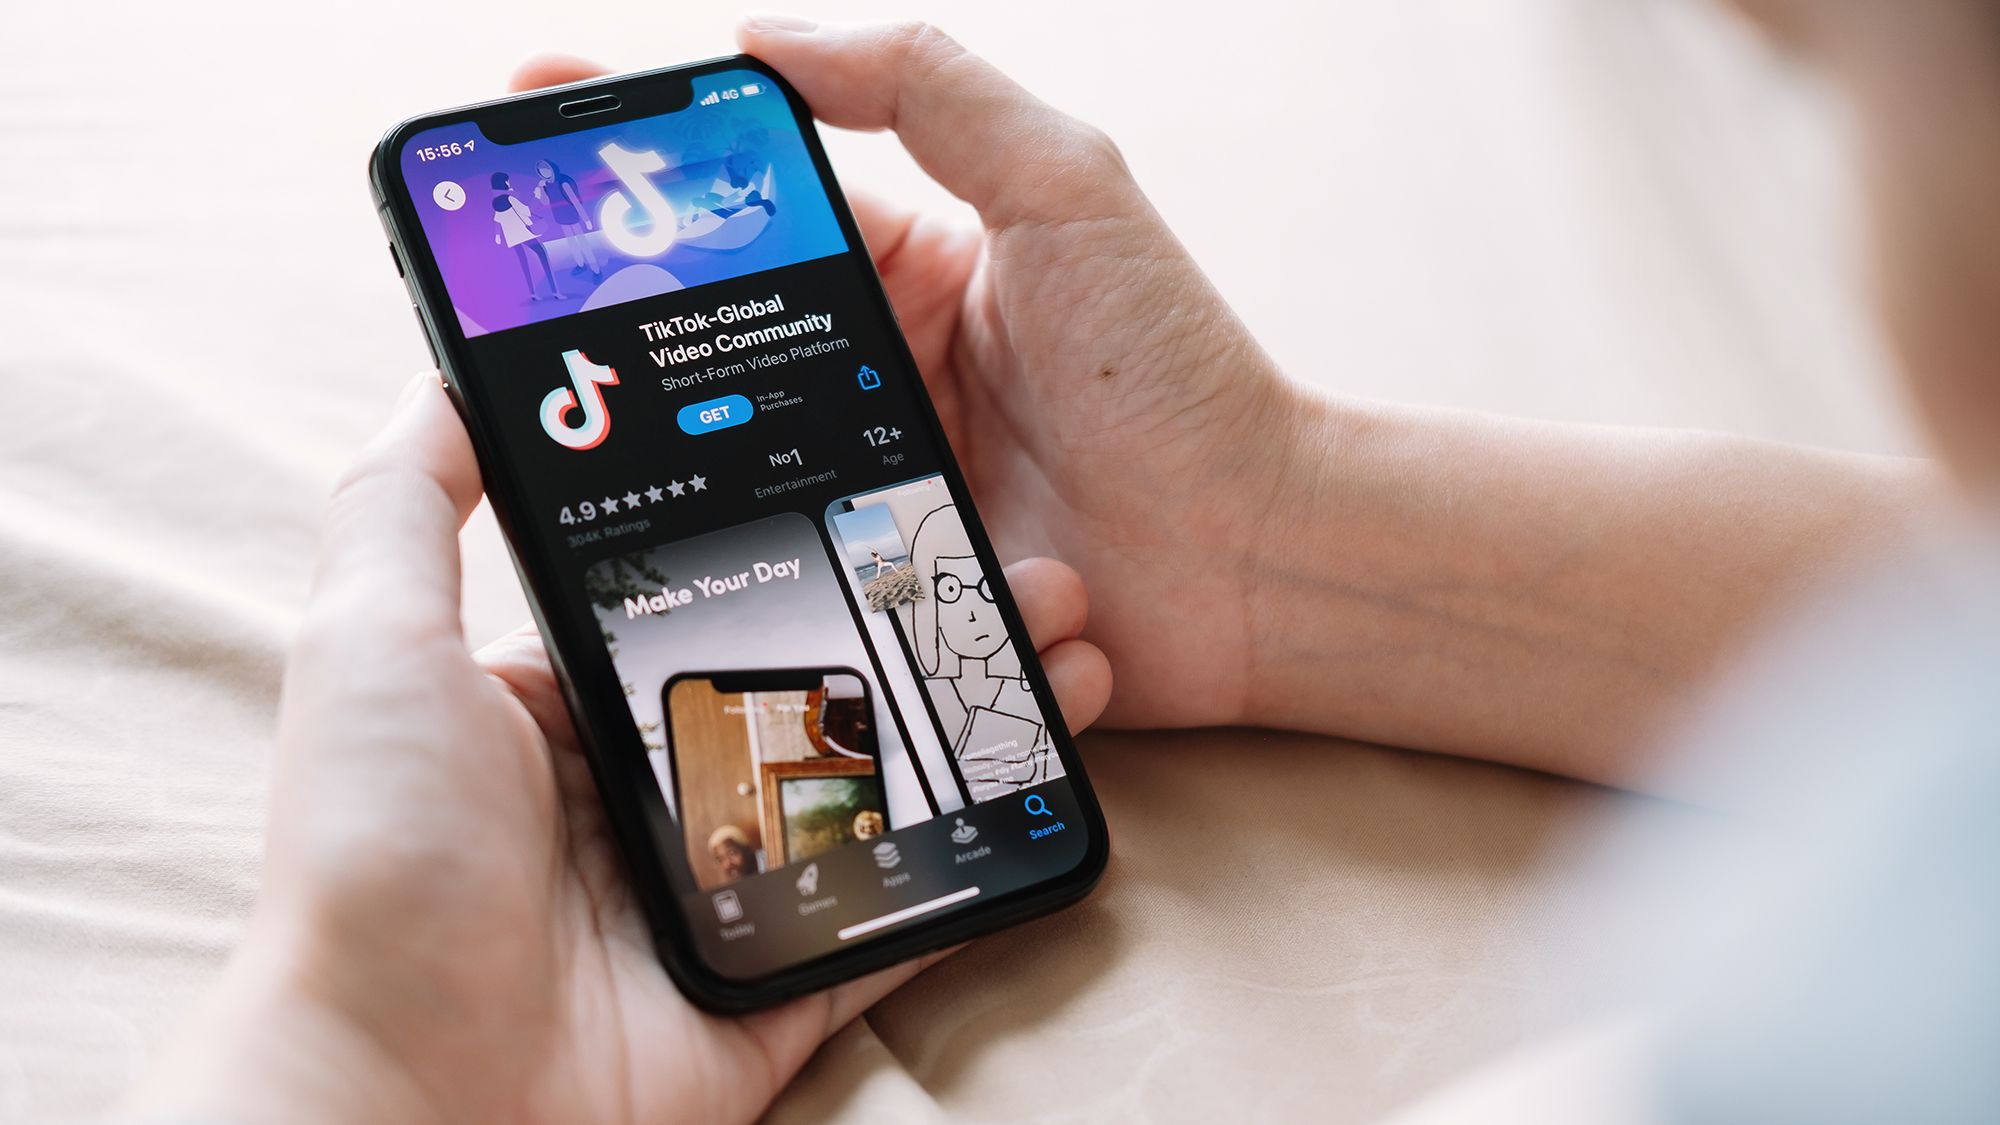 TikTok's In-App Browser Can Monitor Your Keystrokes, Researcher